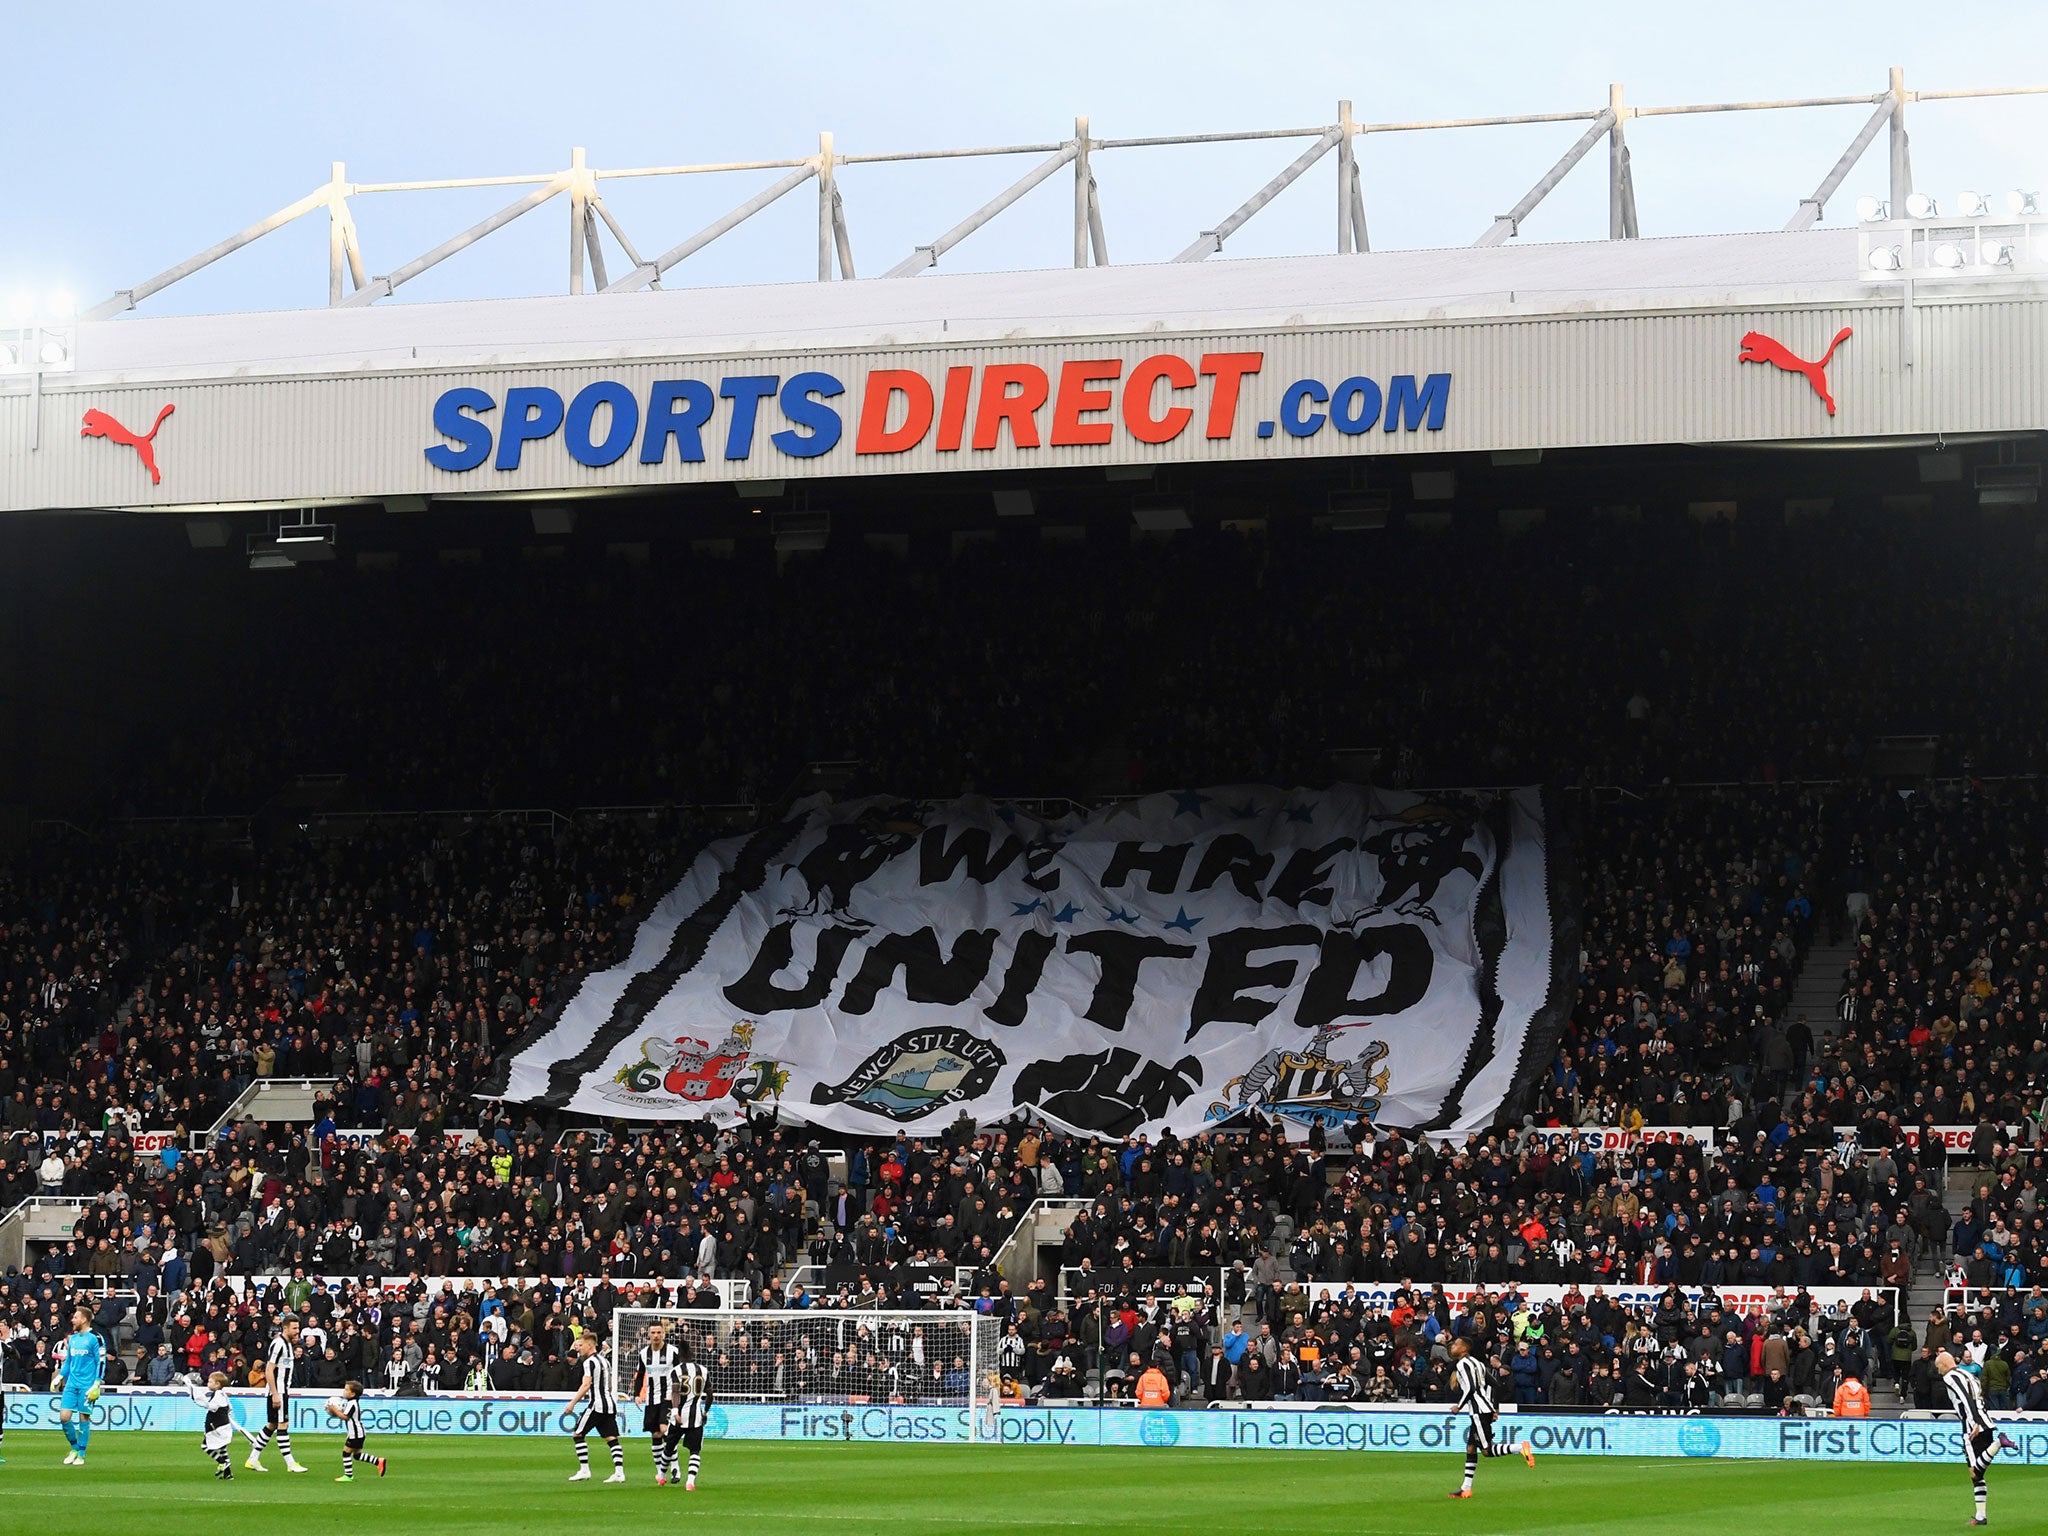 Newcastle United were raided by police as part of an HMRC investigation